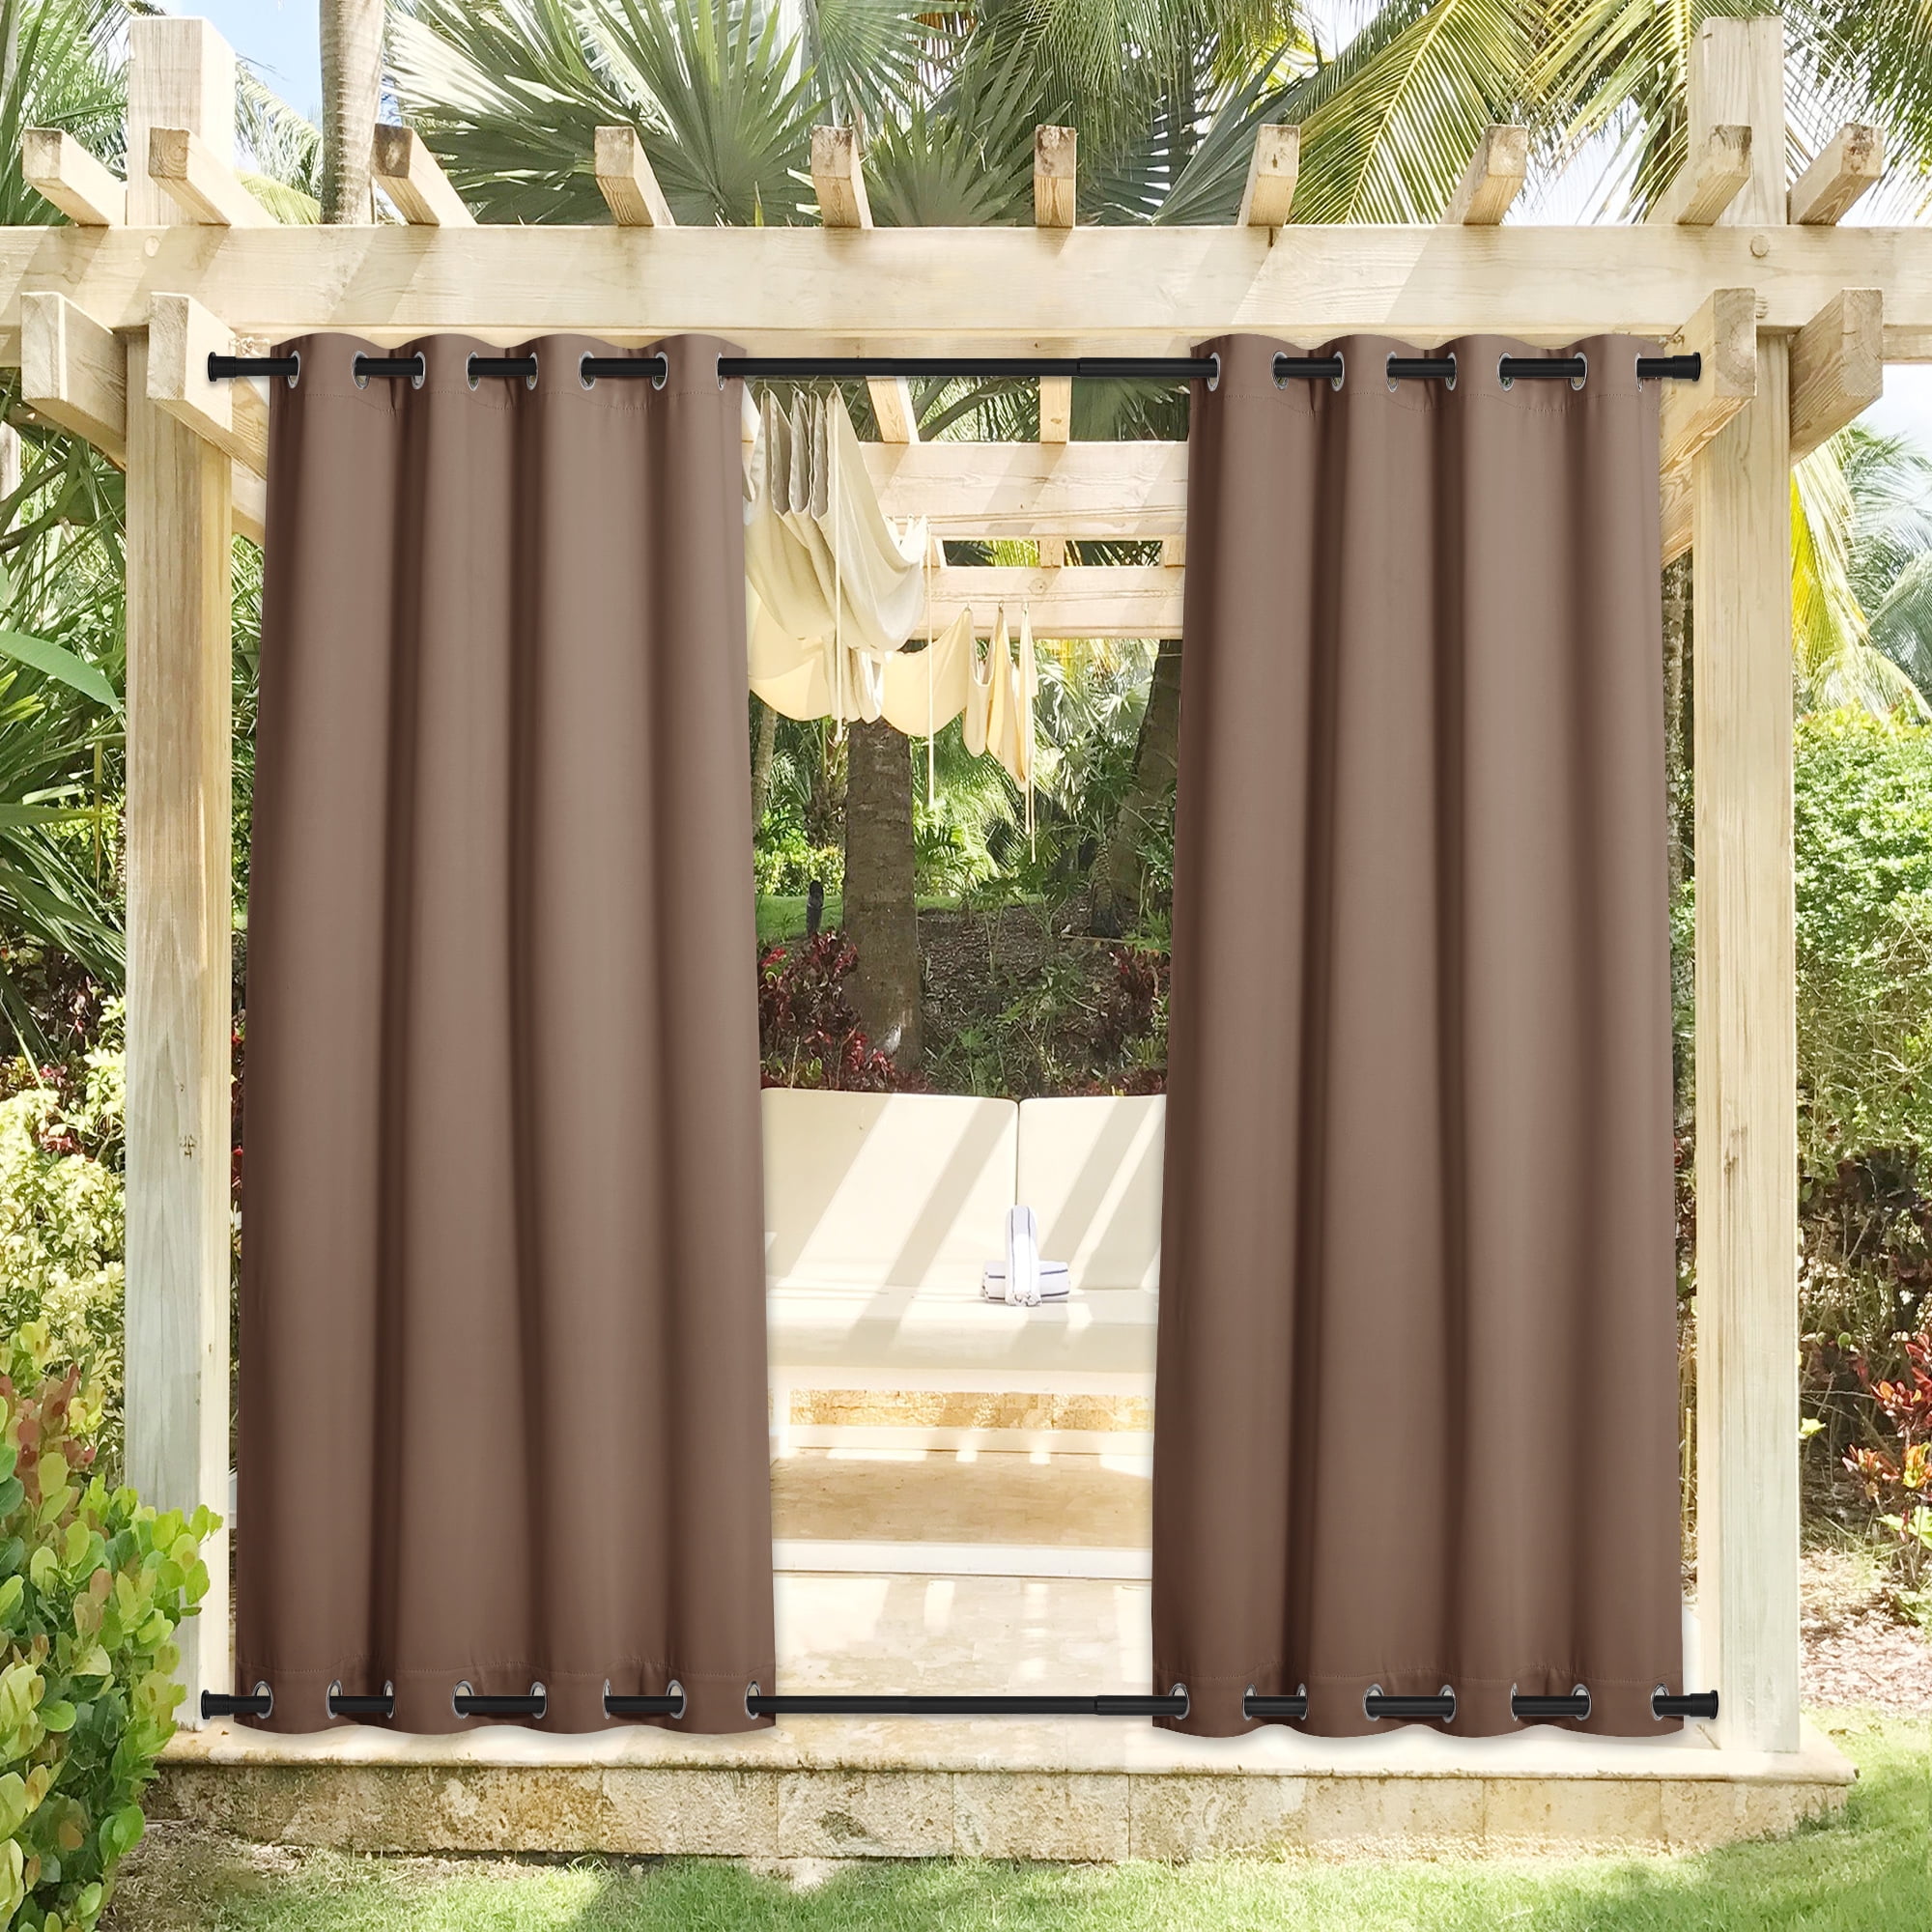 Coodeto 2 Panels Blackout Patio Waterproof Outdoor Curtains, W52